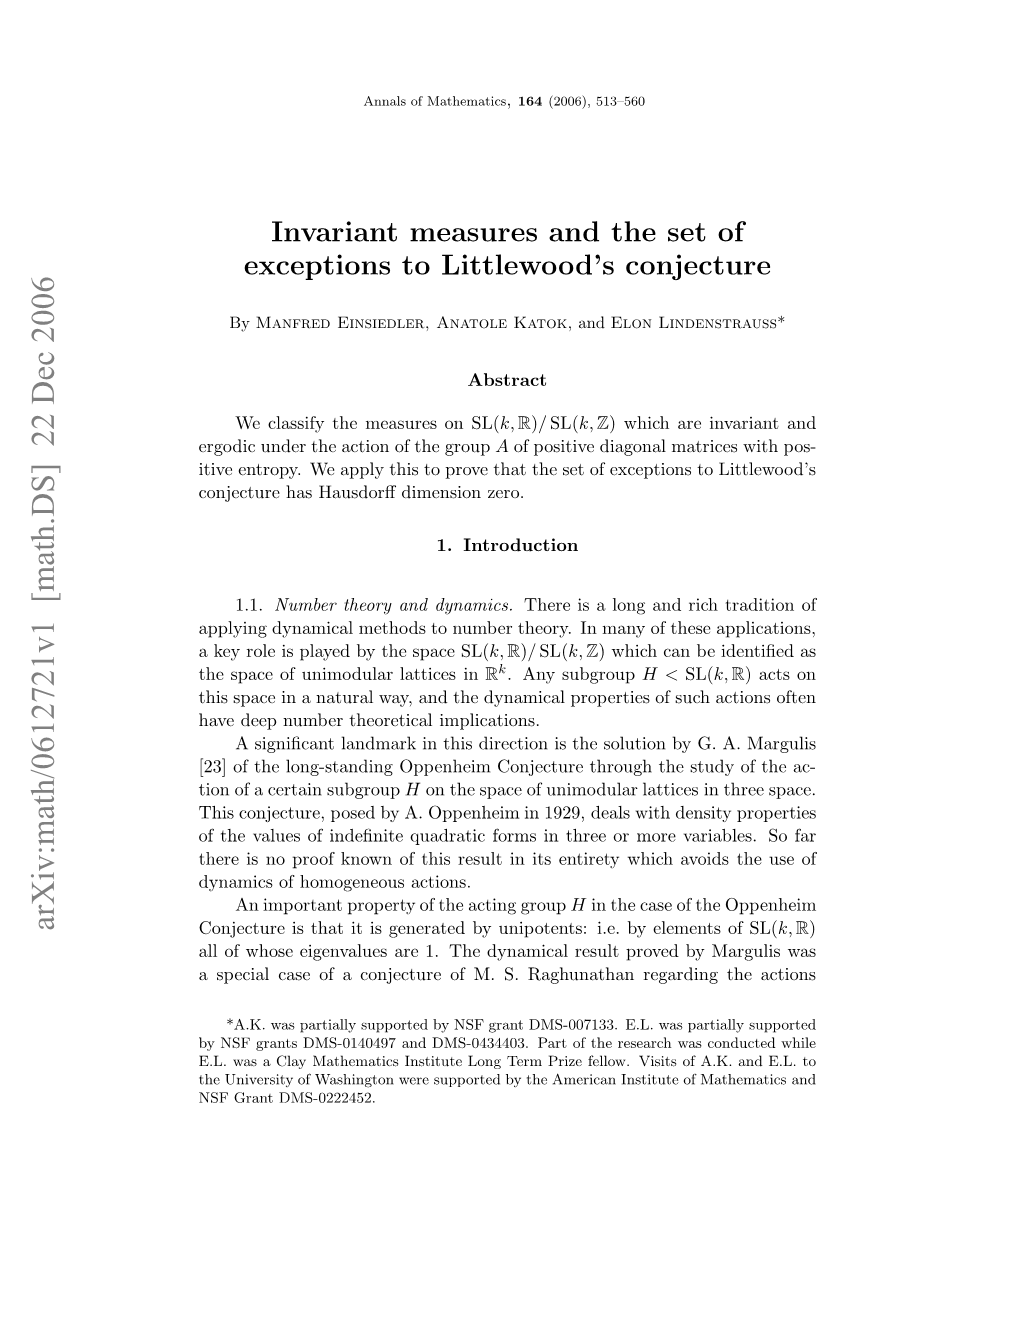 Invariant Measures and the Set of Exceptions to Littlewood's Conjecture